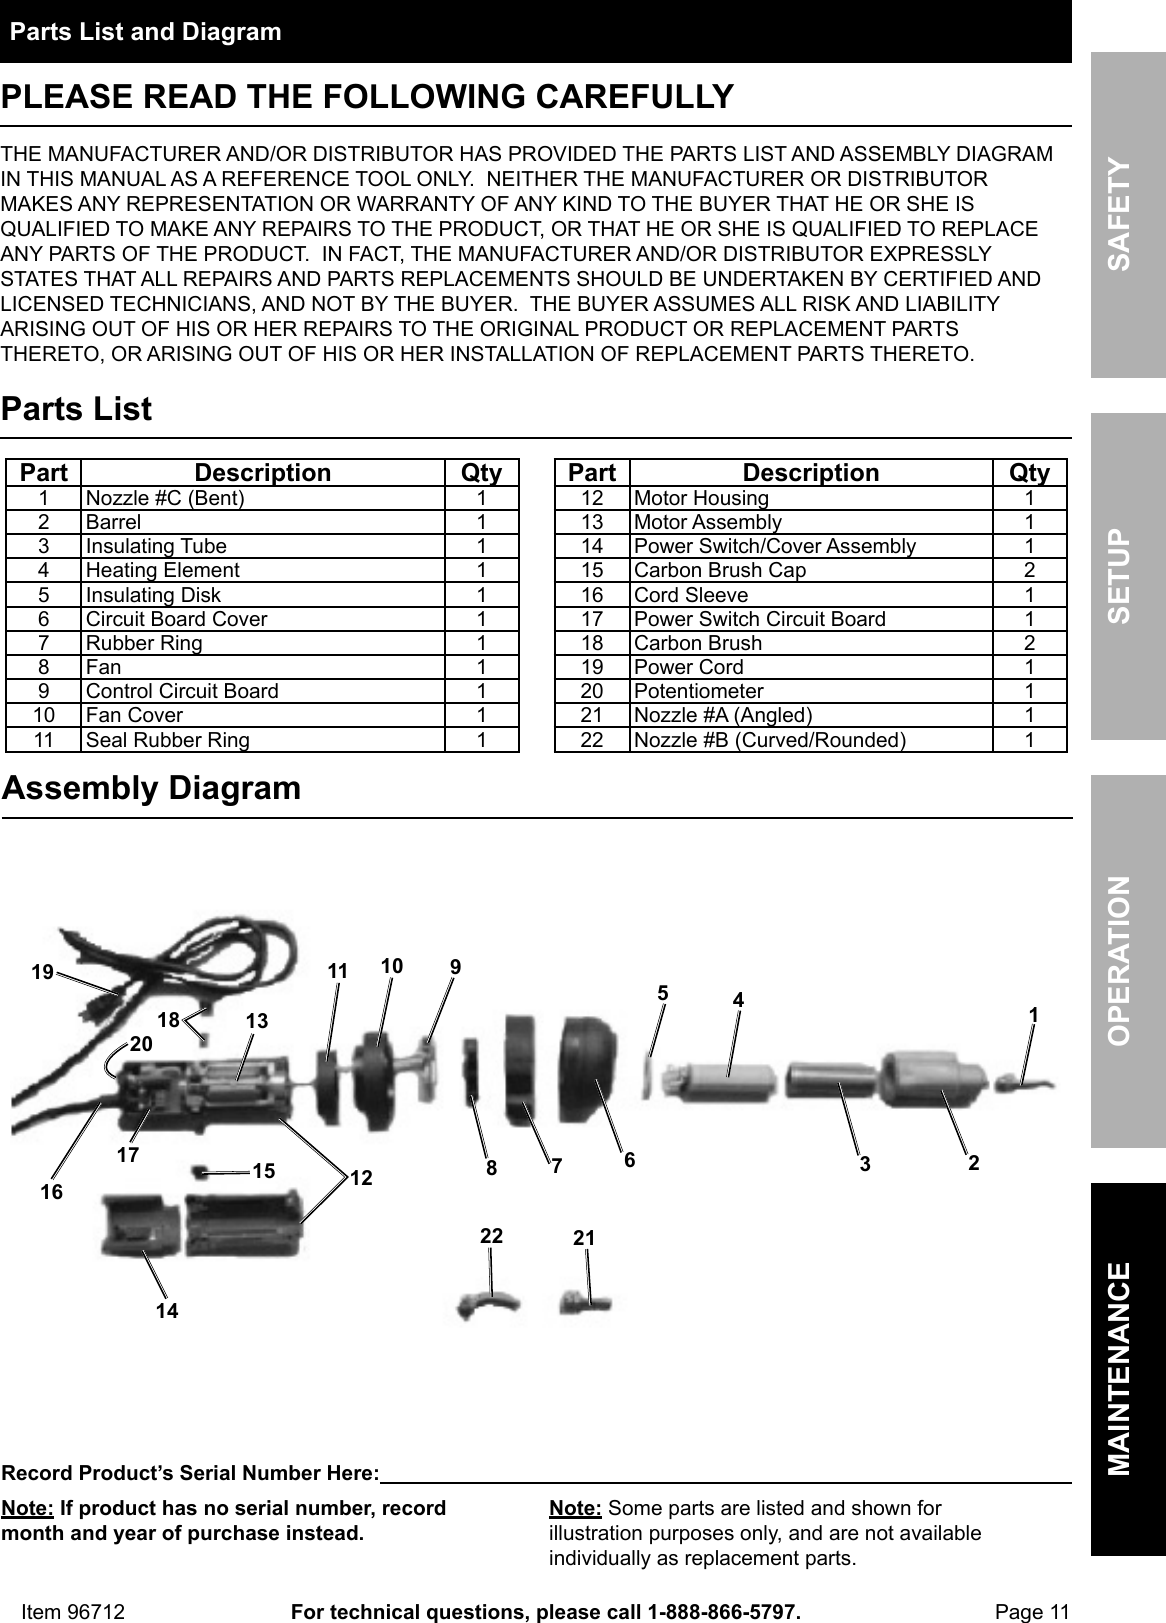 Page 11 of 12 - Harbor-Freight Harbor-Freight-1300-Watt-Plastic-Welding-Kit-With-Air-Motor-And-Temperature-Adjustment-Product-Manual-  Harbor-freight-1300-watt-plastic-welding-kit-with-air-motor-and-temperature-adjustment-product-manual